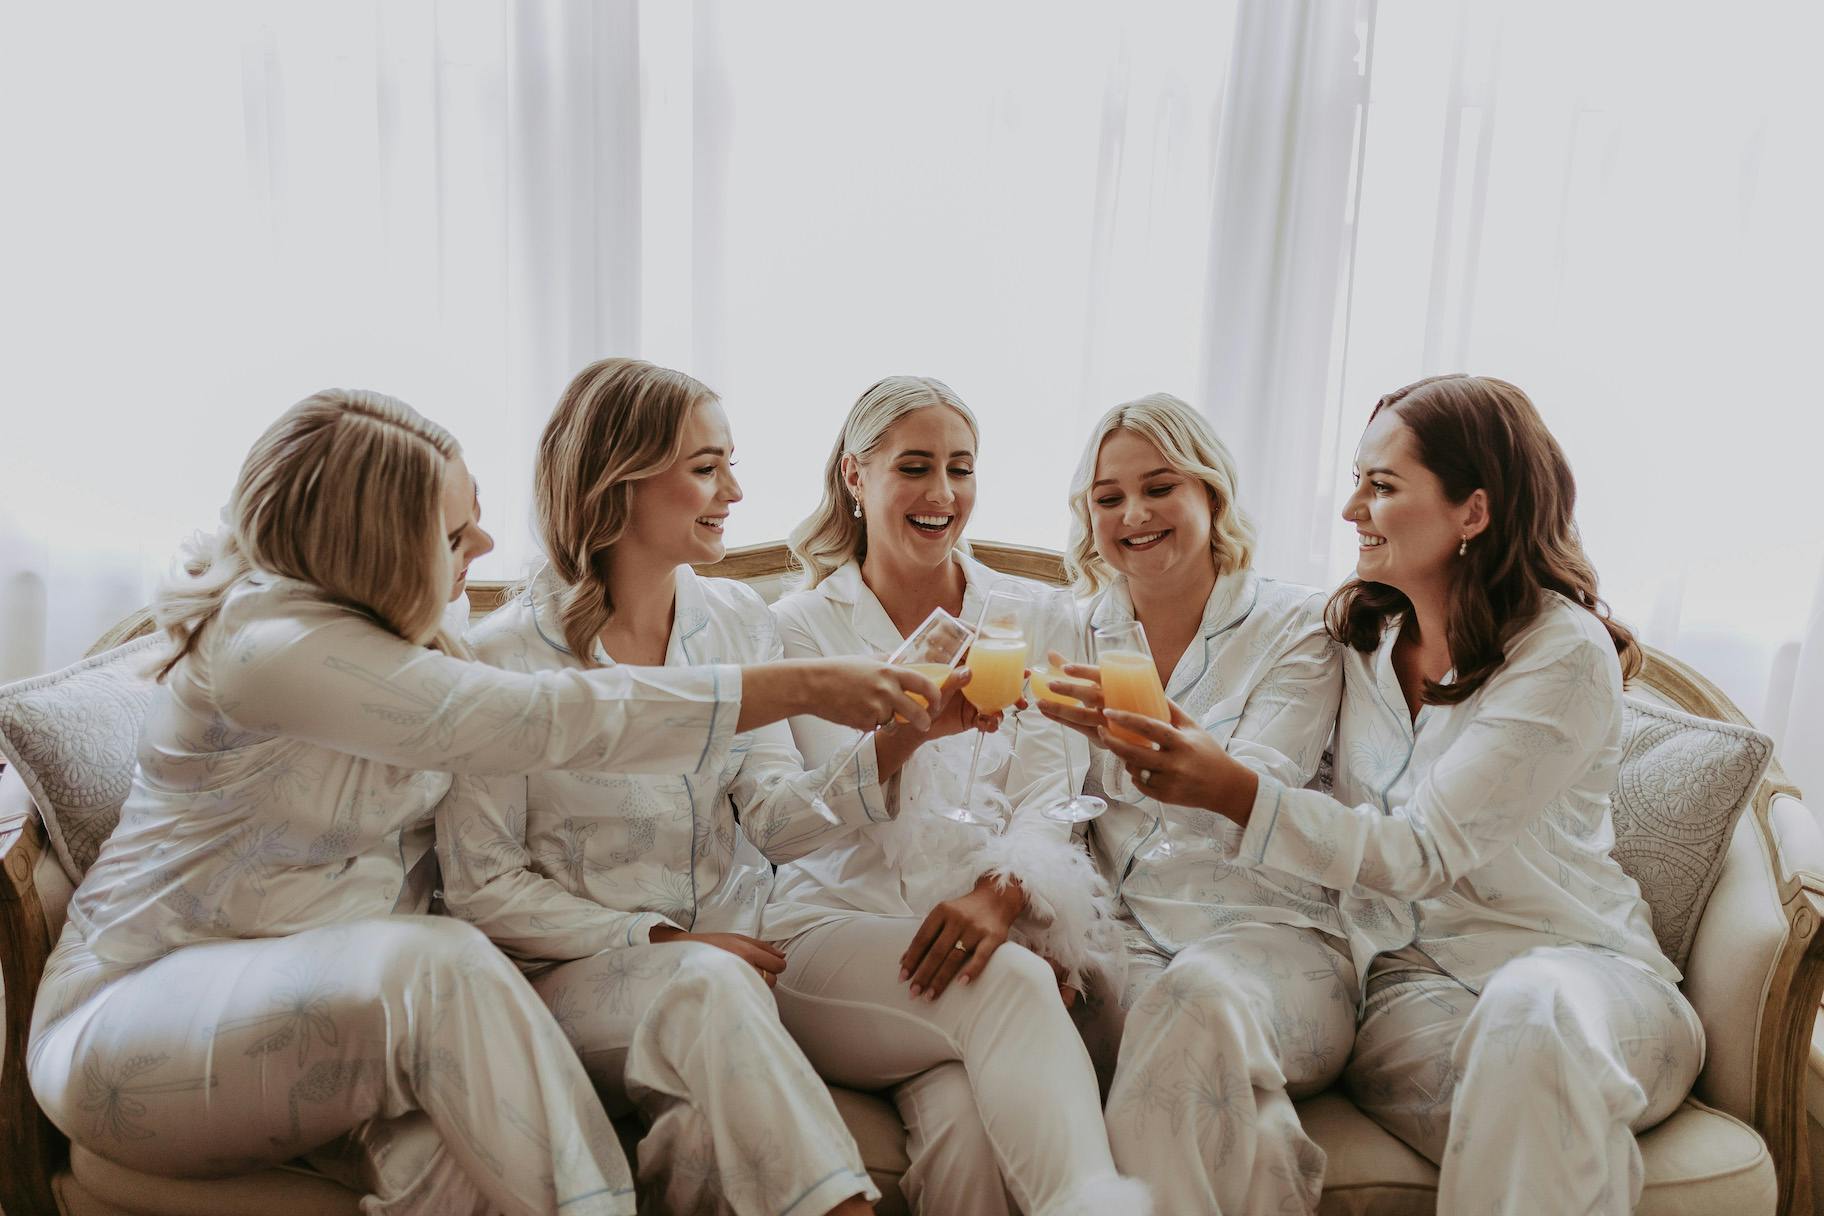 Five people in matching white pajamas are sitting on a couch, smiling and clinking glasses of orange juice in a cheerful toast. They appear to be celebrating a special occasion, like a wedding morning or a bachelorette party, in a bright room with light curtains.